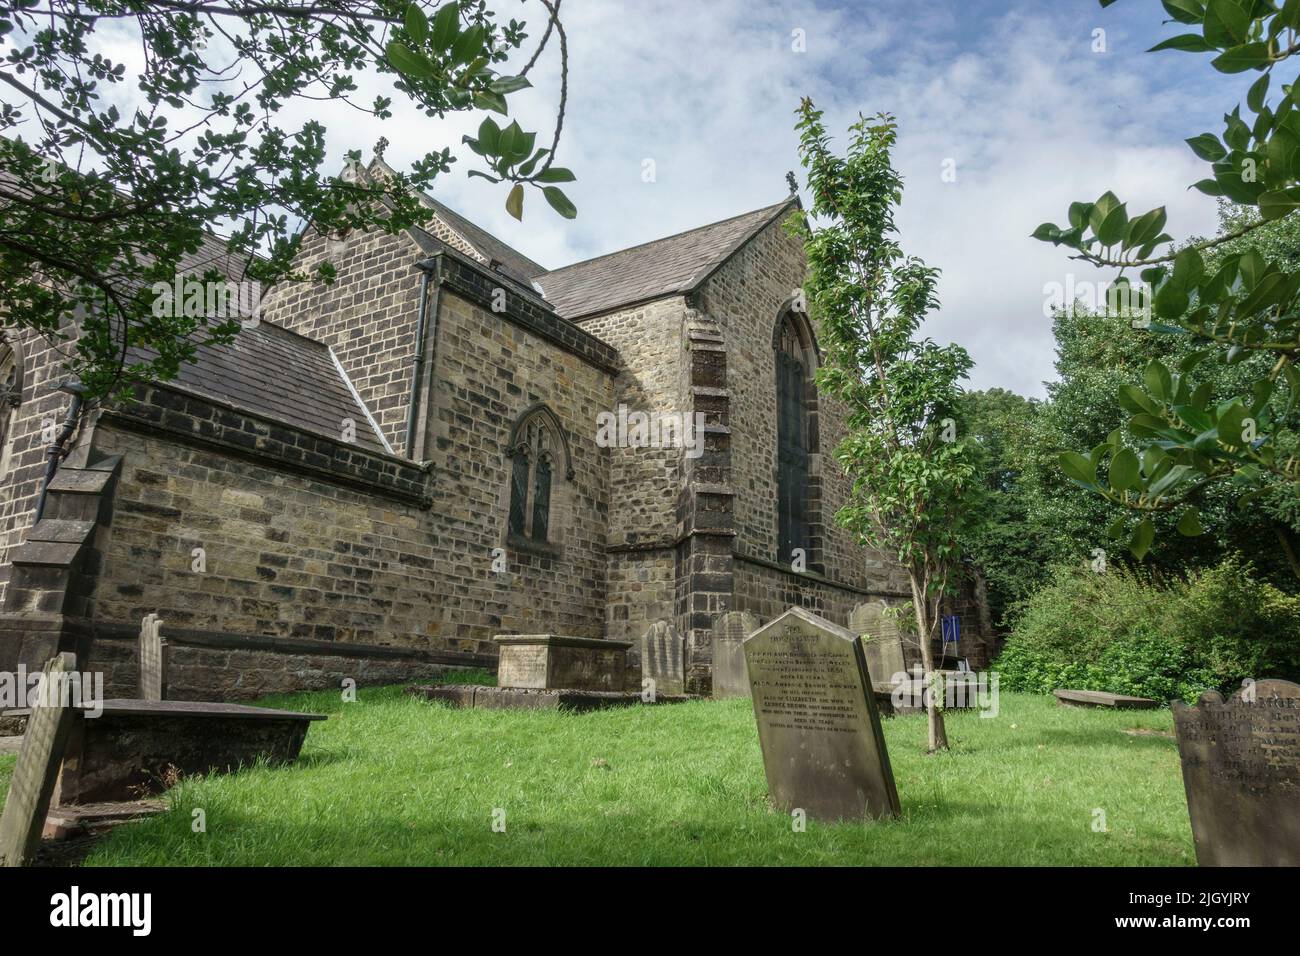 All Saints' Church, in Otley, West Yorkshire, UK. Stock Photo